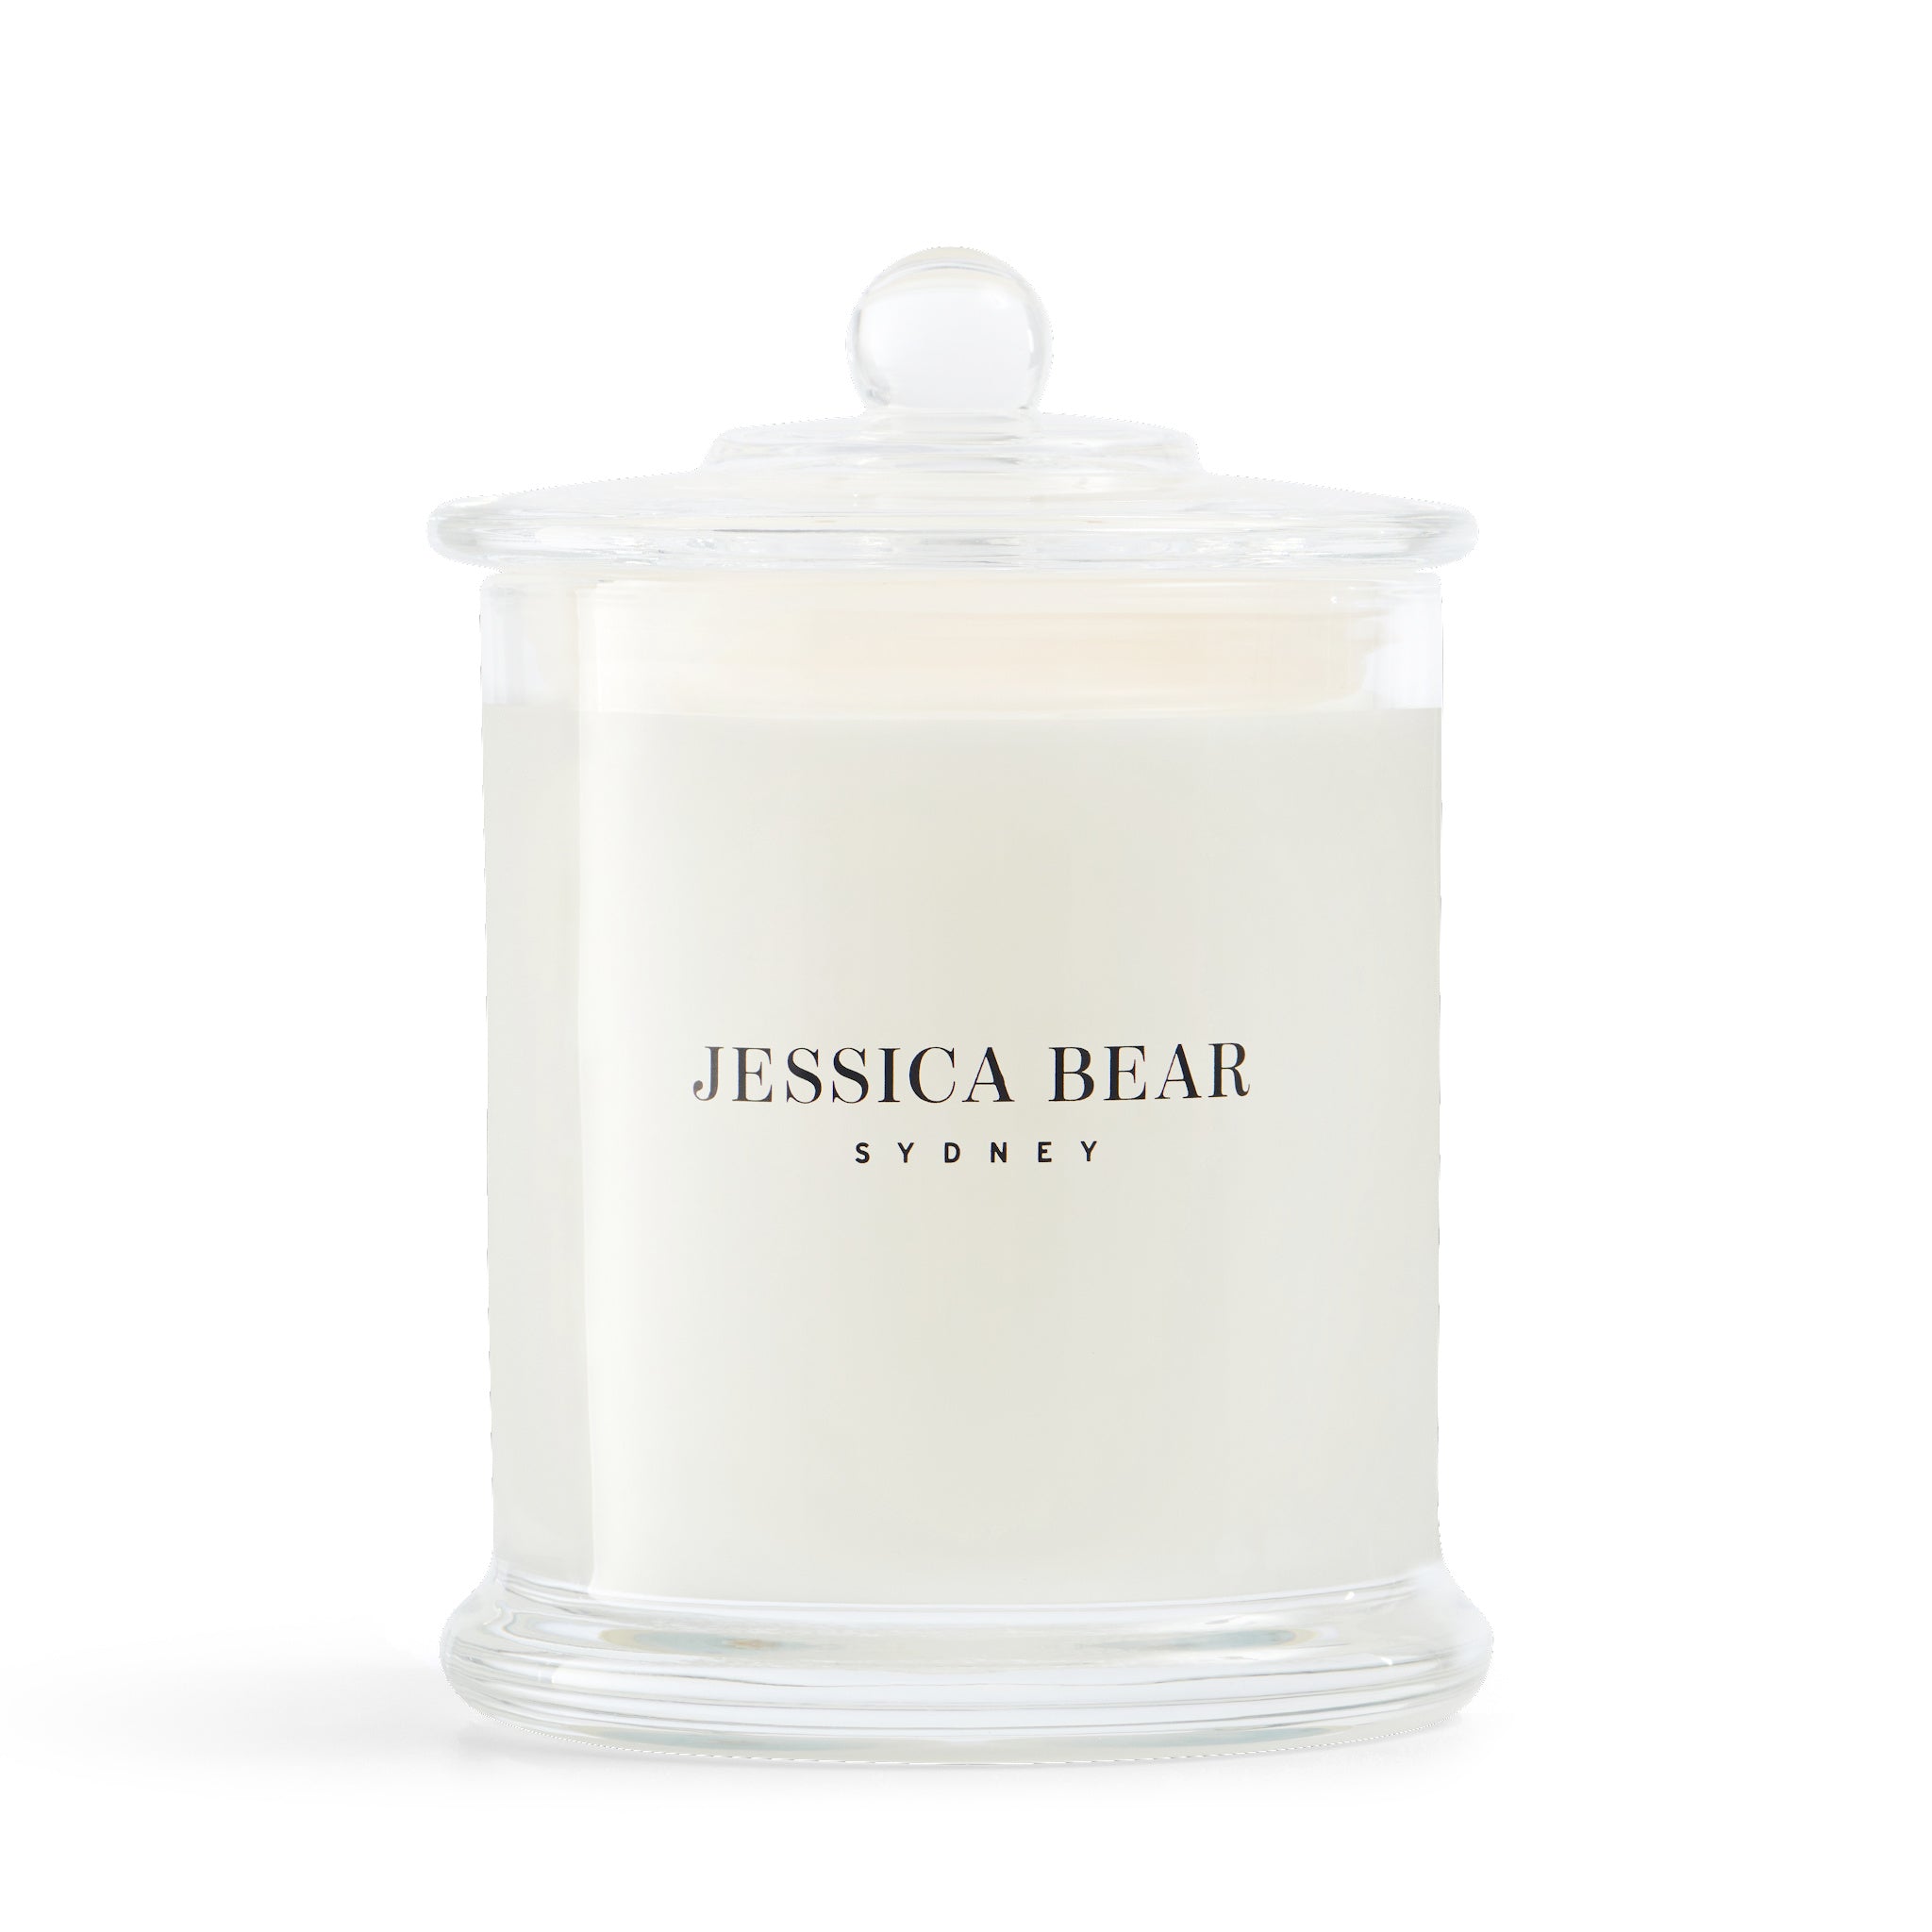 Gianluca - 380g Scented Candle